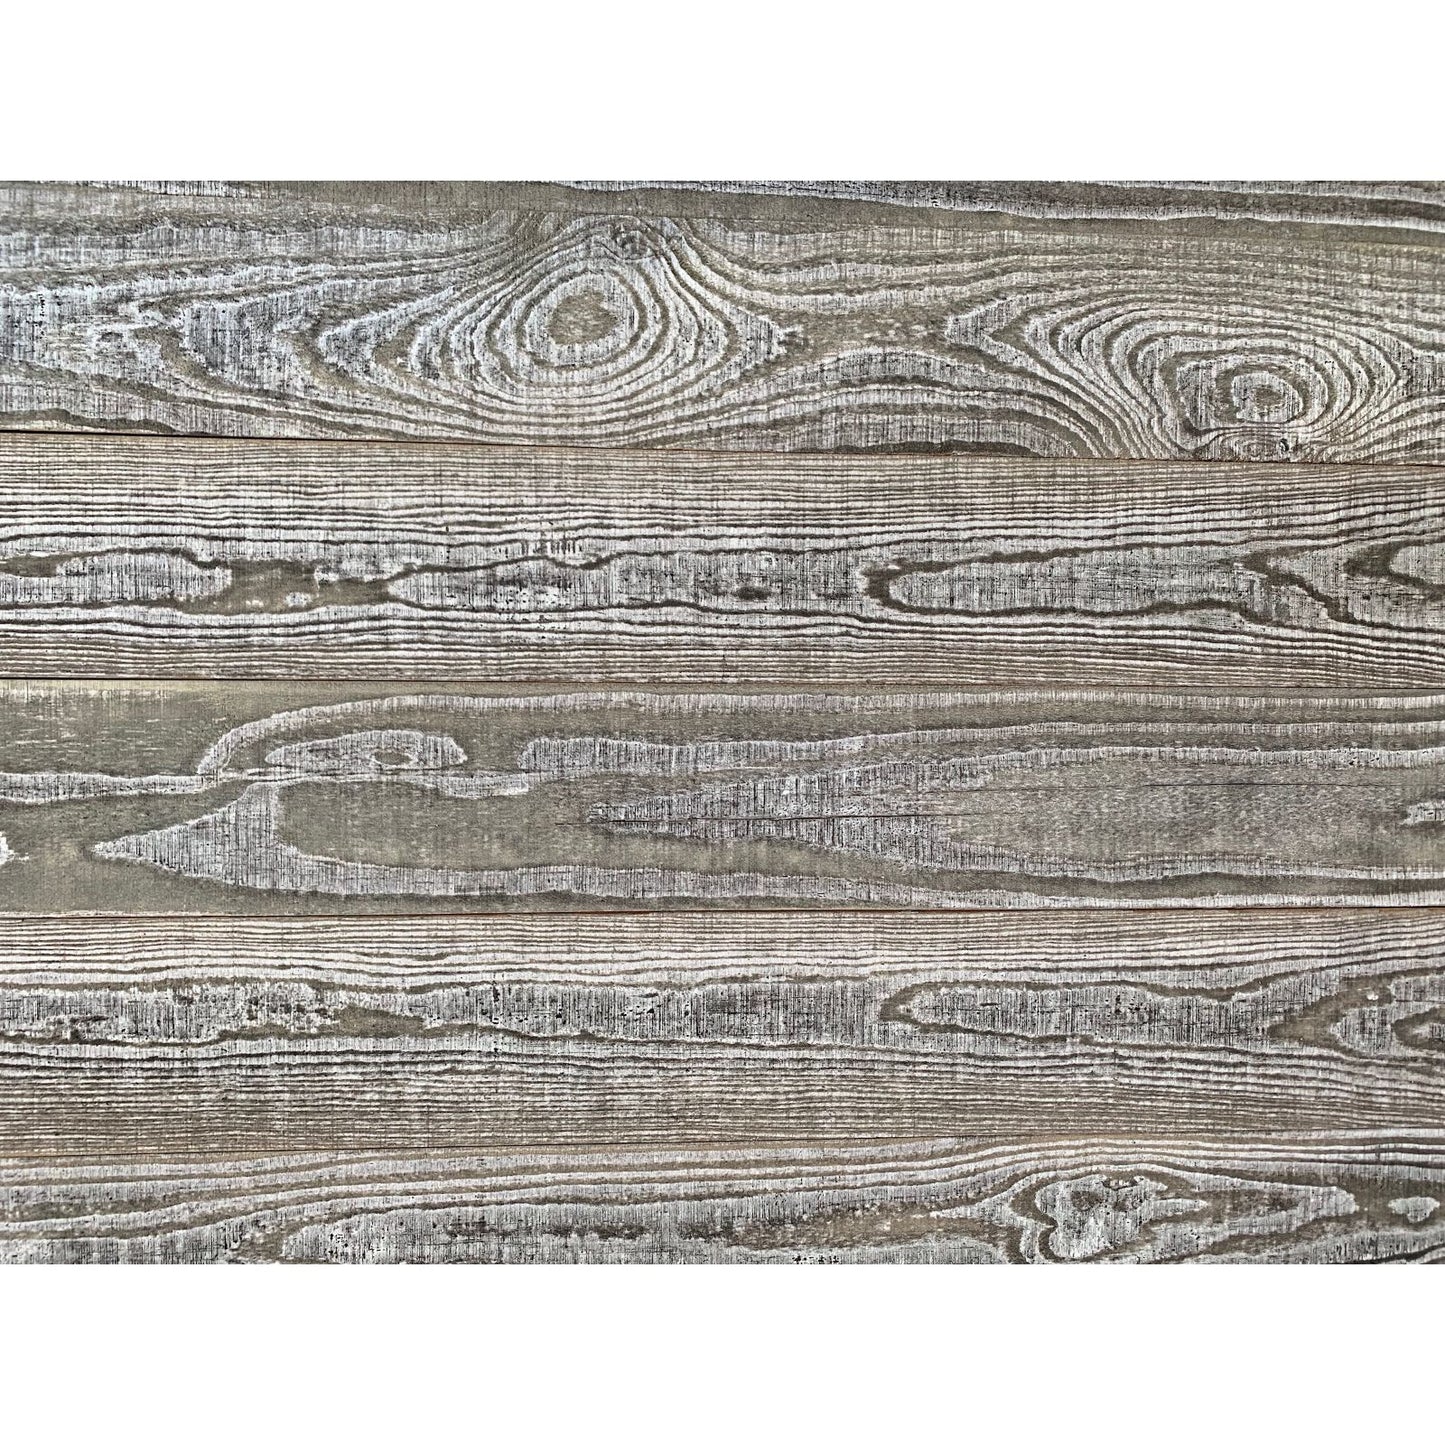 5" x 48" Thermo Treated Rustic Gray Wood Wall Plank Set